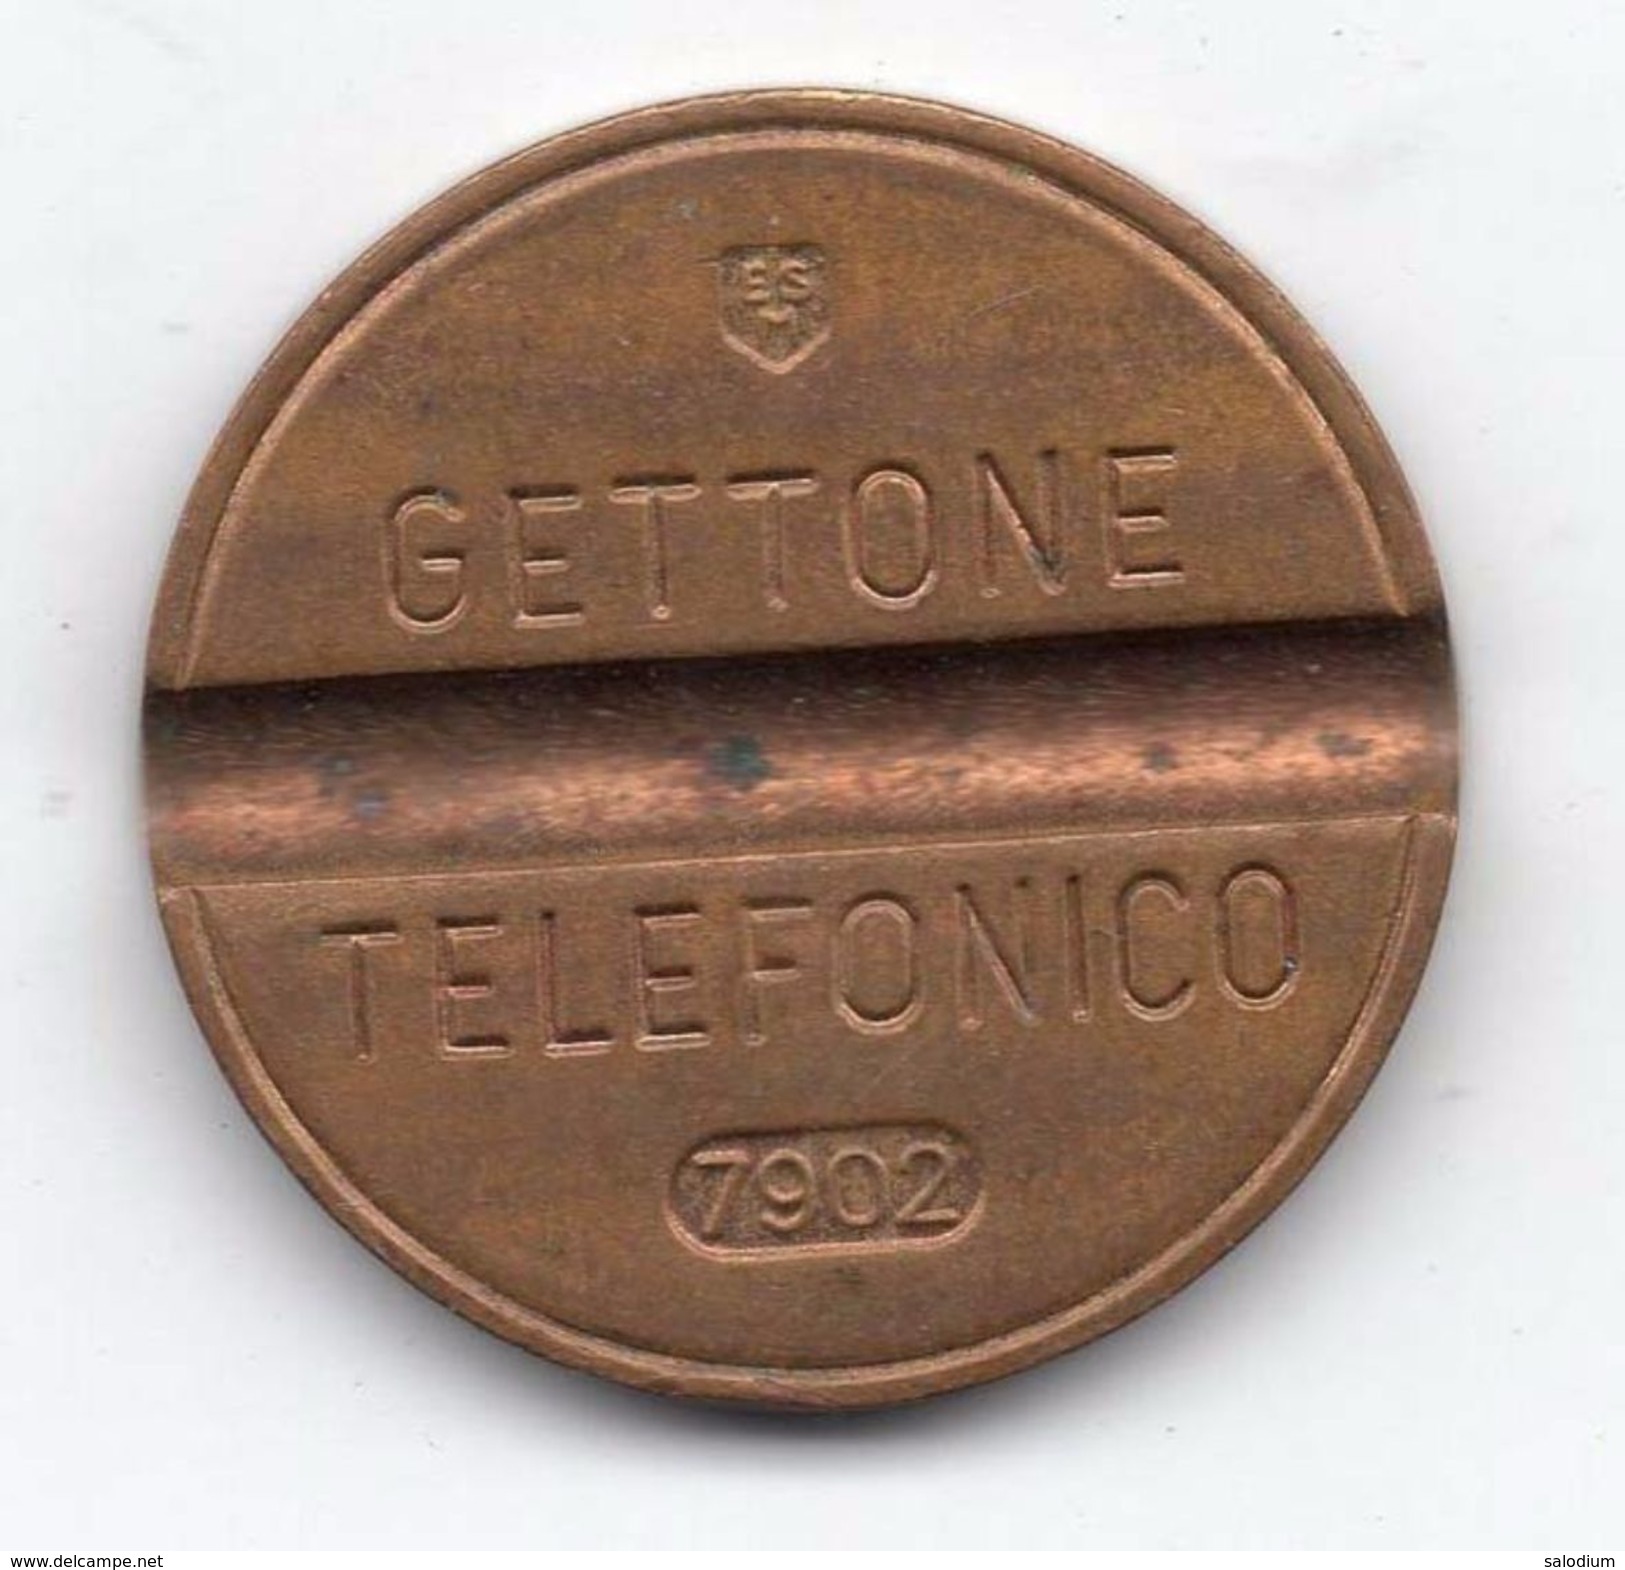 Gettone Telefonico 7902 Token Telephone - (Id-781) - Professionals/Firms